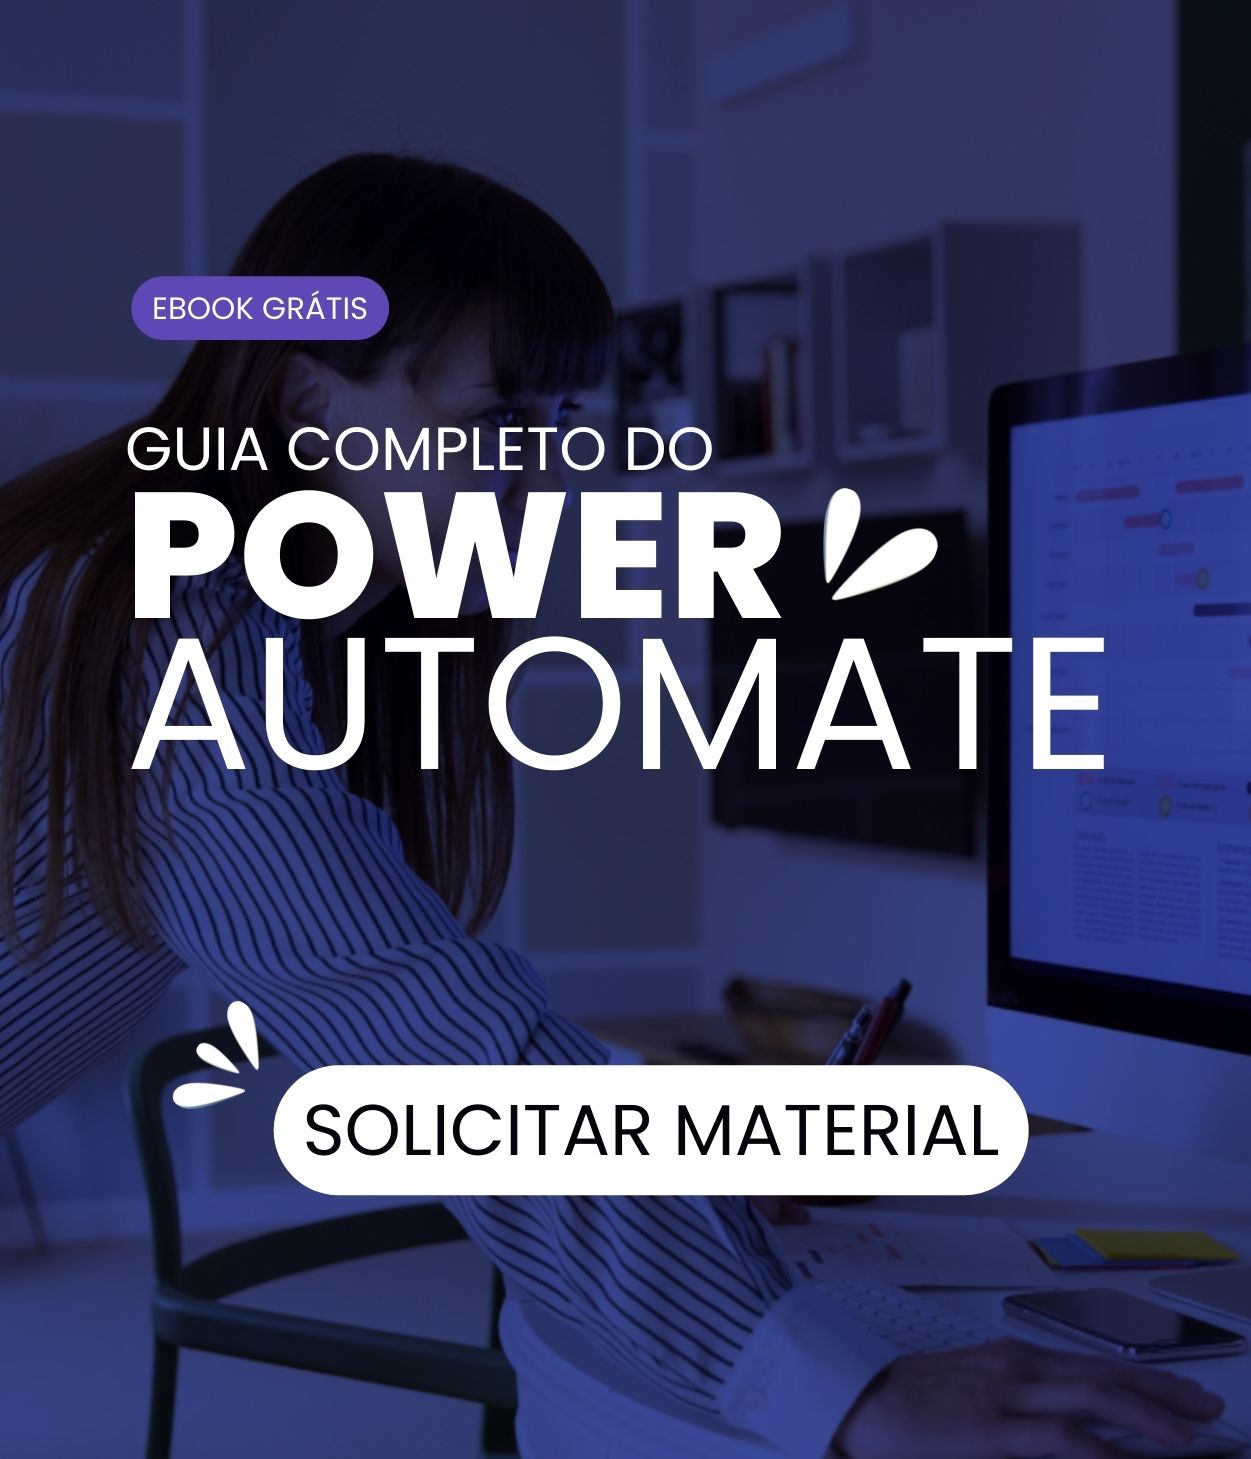 VERTICAL GUIA COMPLETO SOBRE POWER AUTOMATE